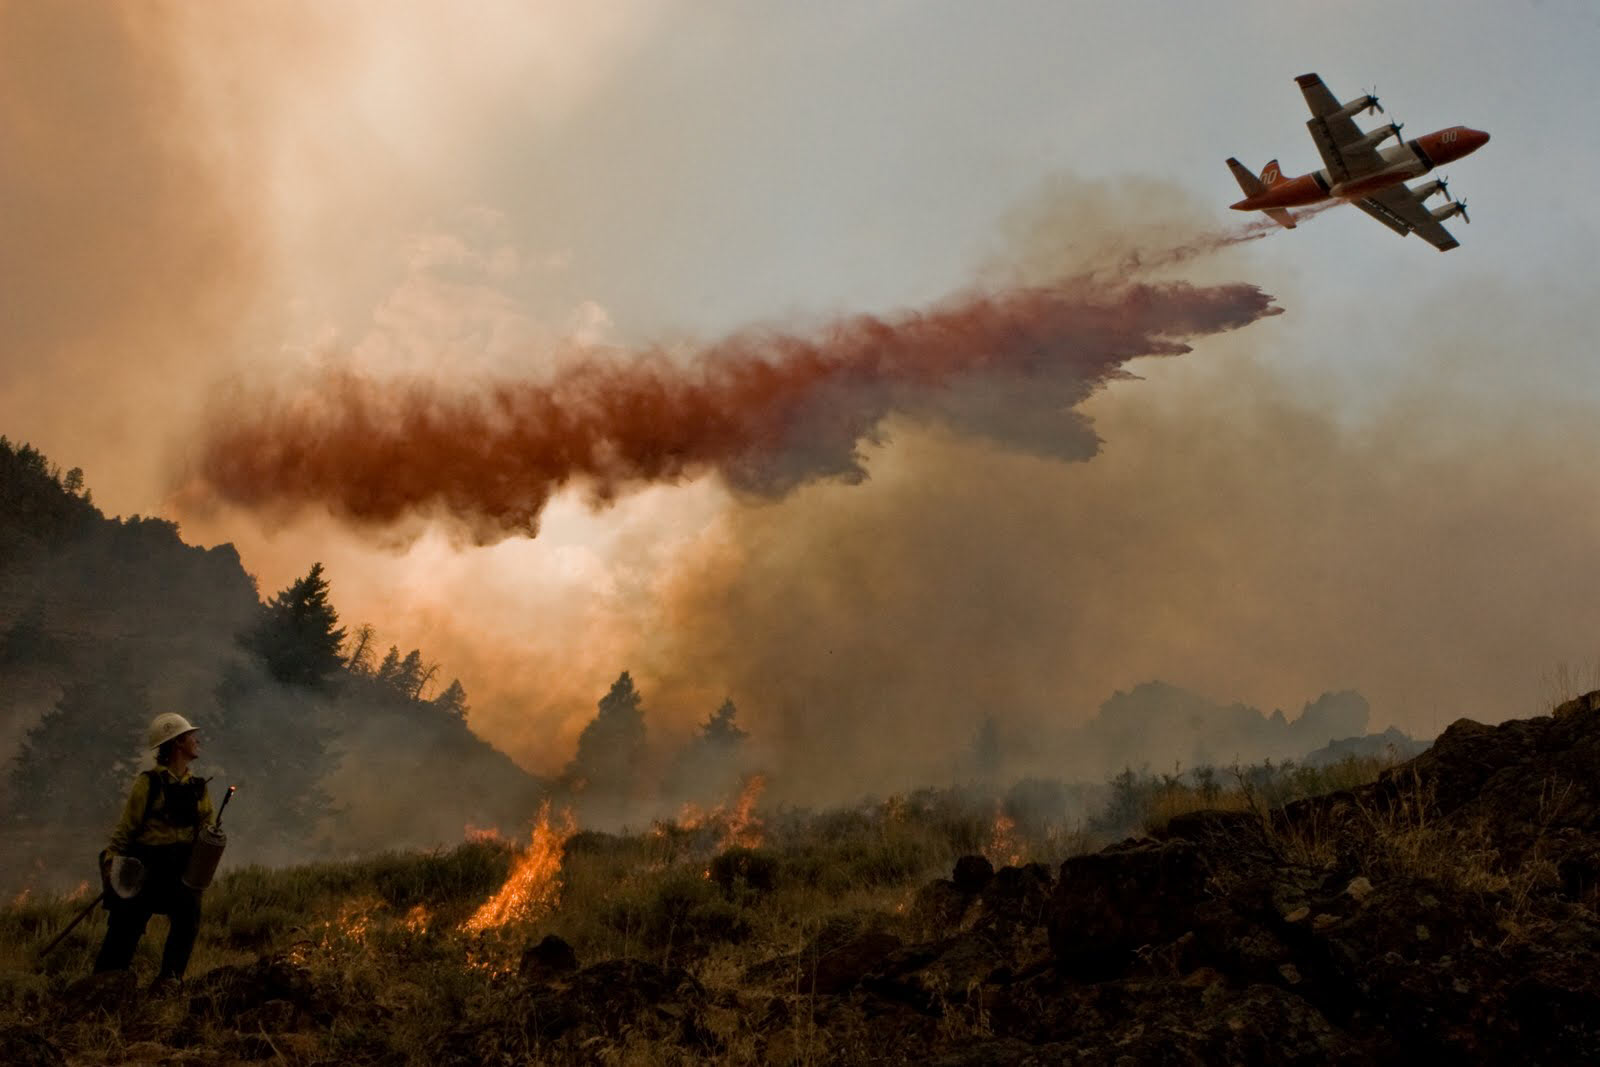 An airtanker aircraft dropping fire retardant on a forest fire while a lone wildland firefighter looks up at the aircraft from below.